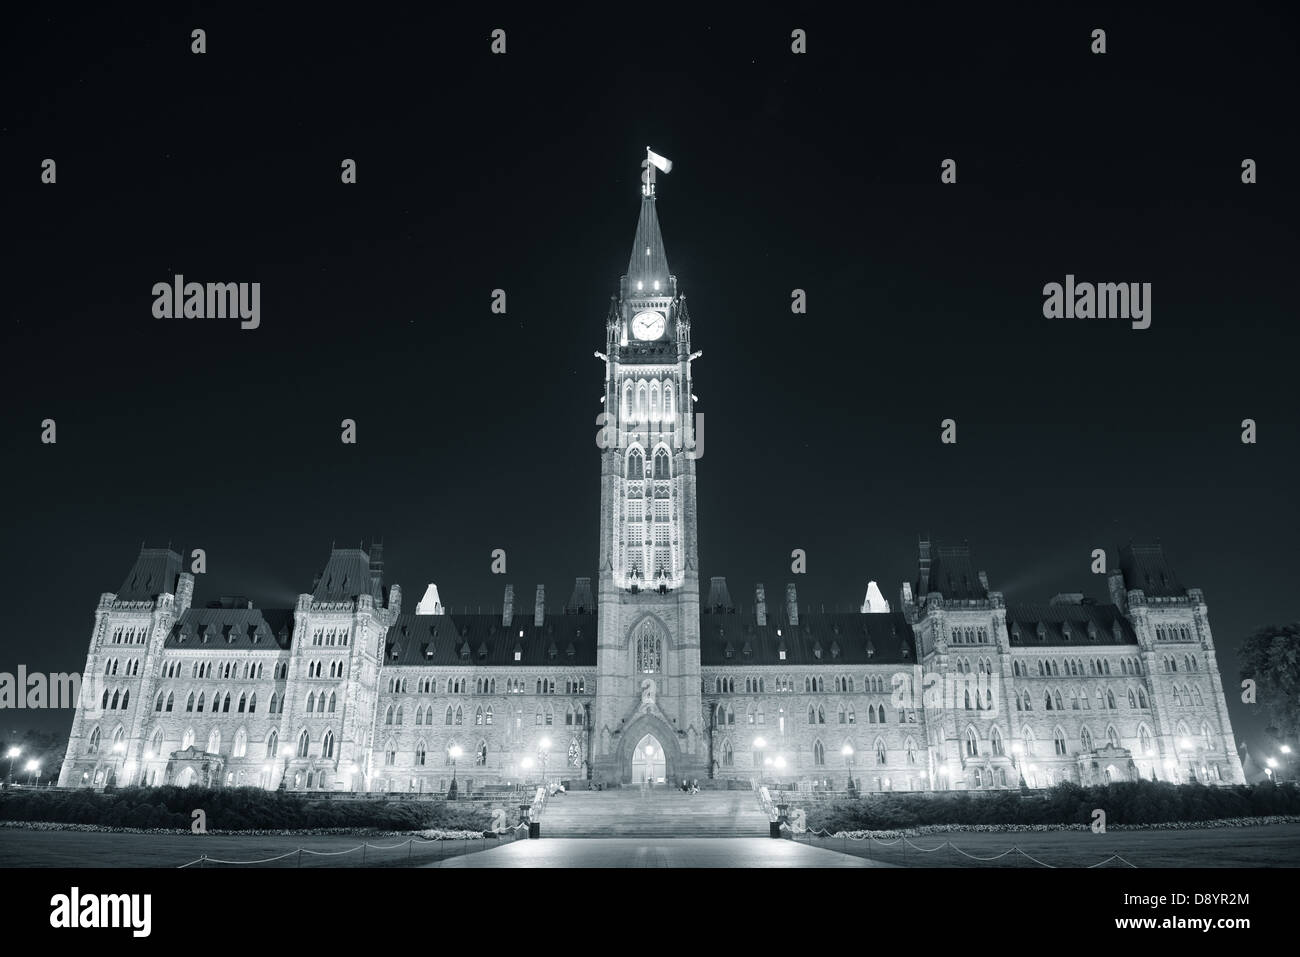 Parliament Hill building at night in black and white in Ottawa, Canada Stock Photo